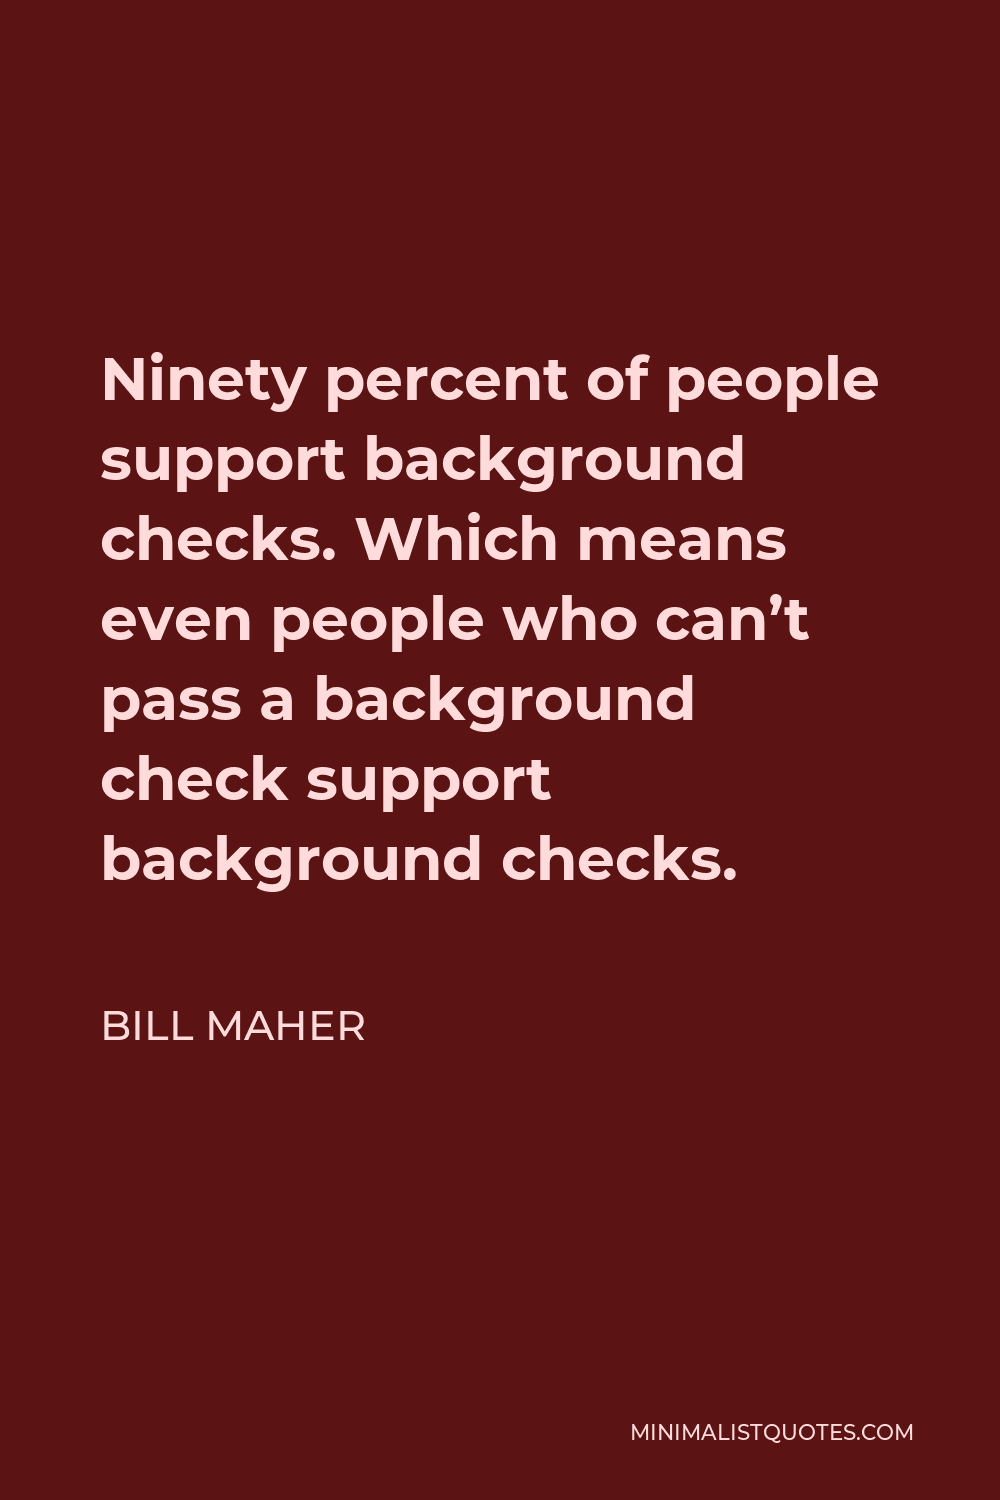 Bill Maher Quote - Ninety percent of people support background checks. Which means even people who can’t pass a background check support background checks.